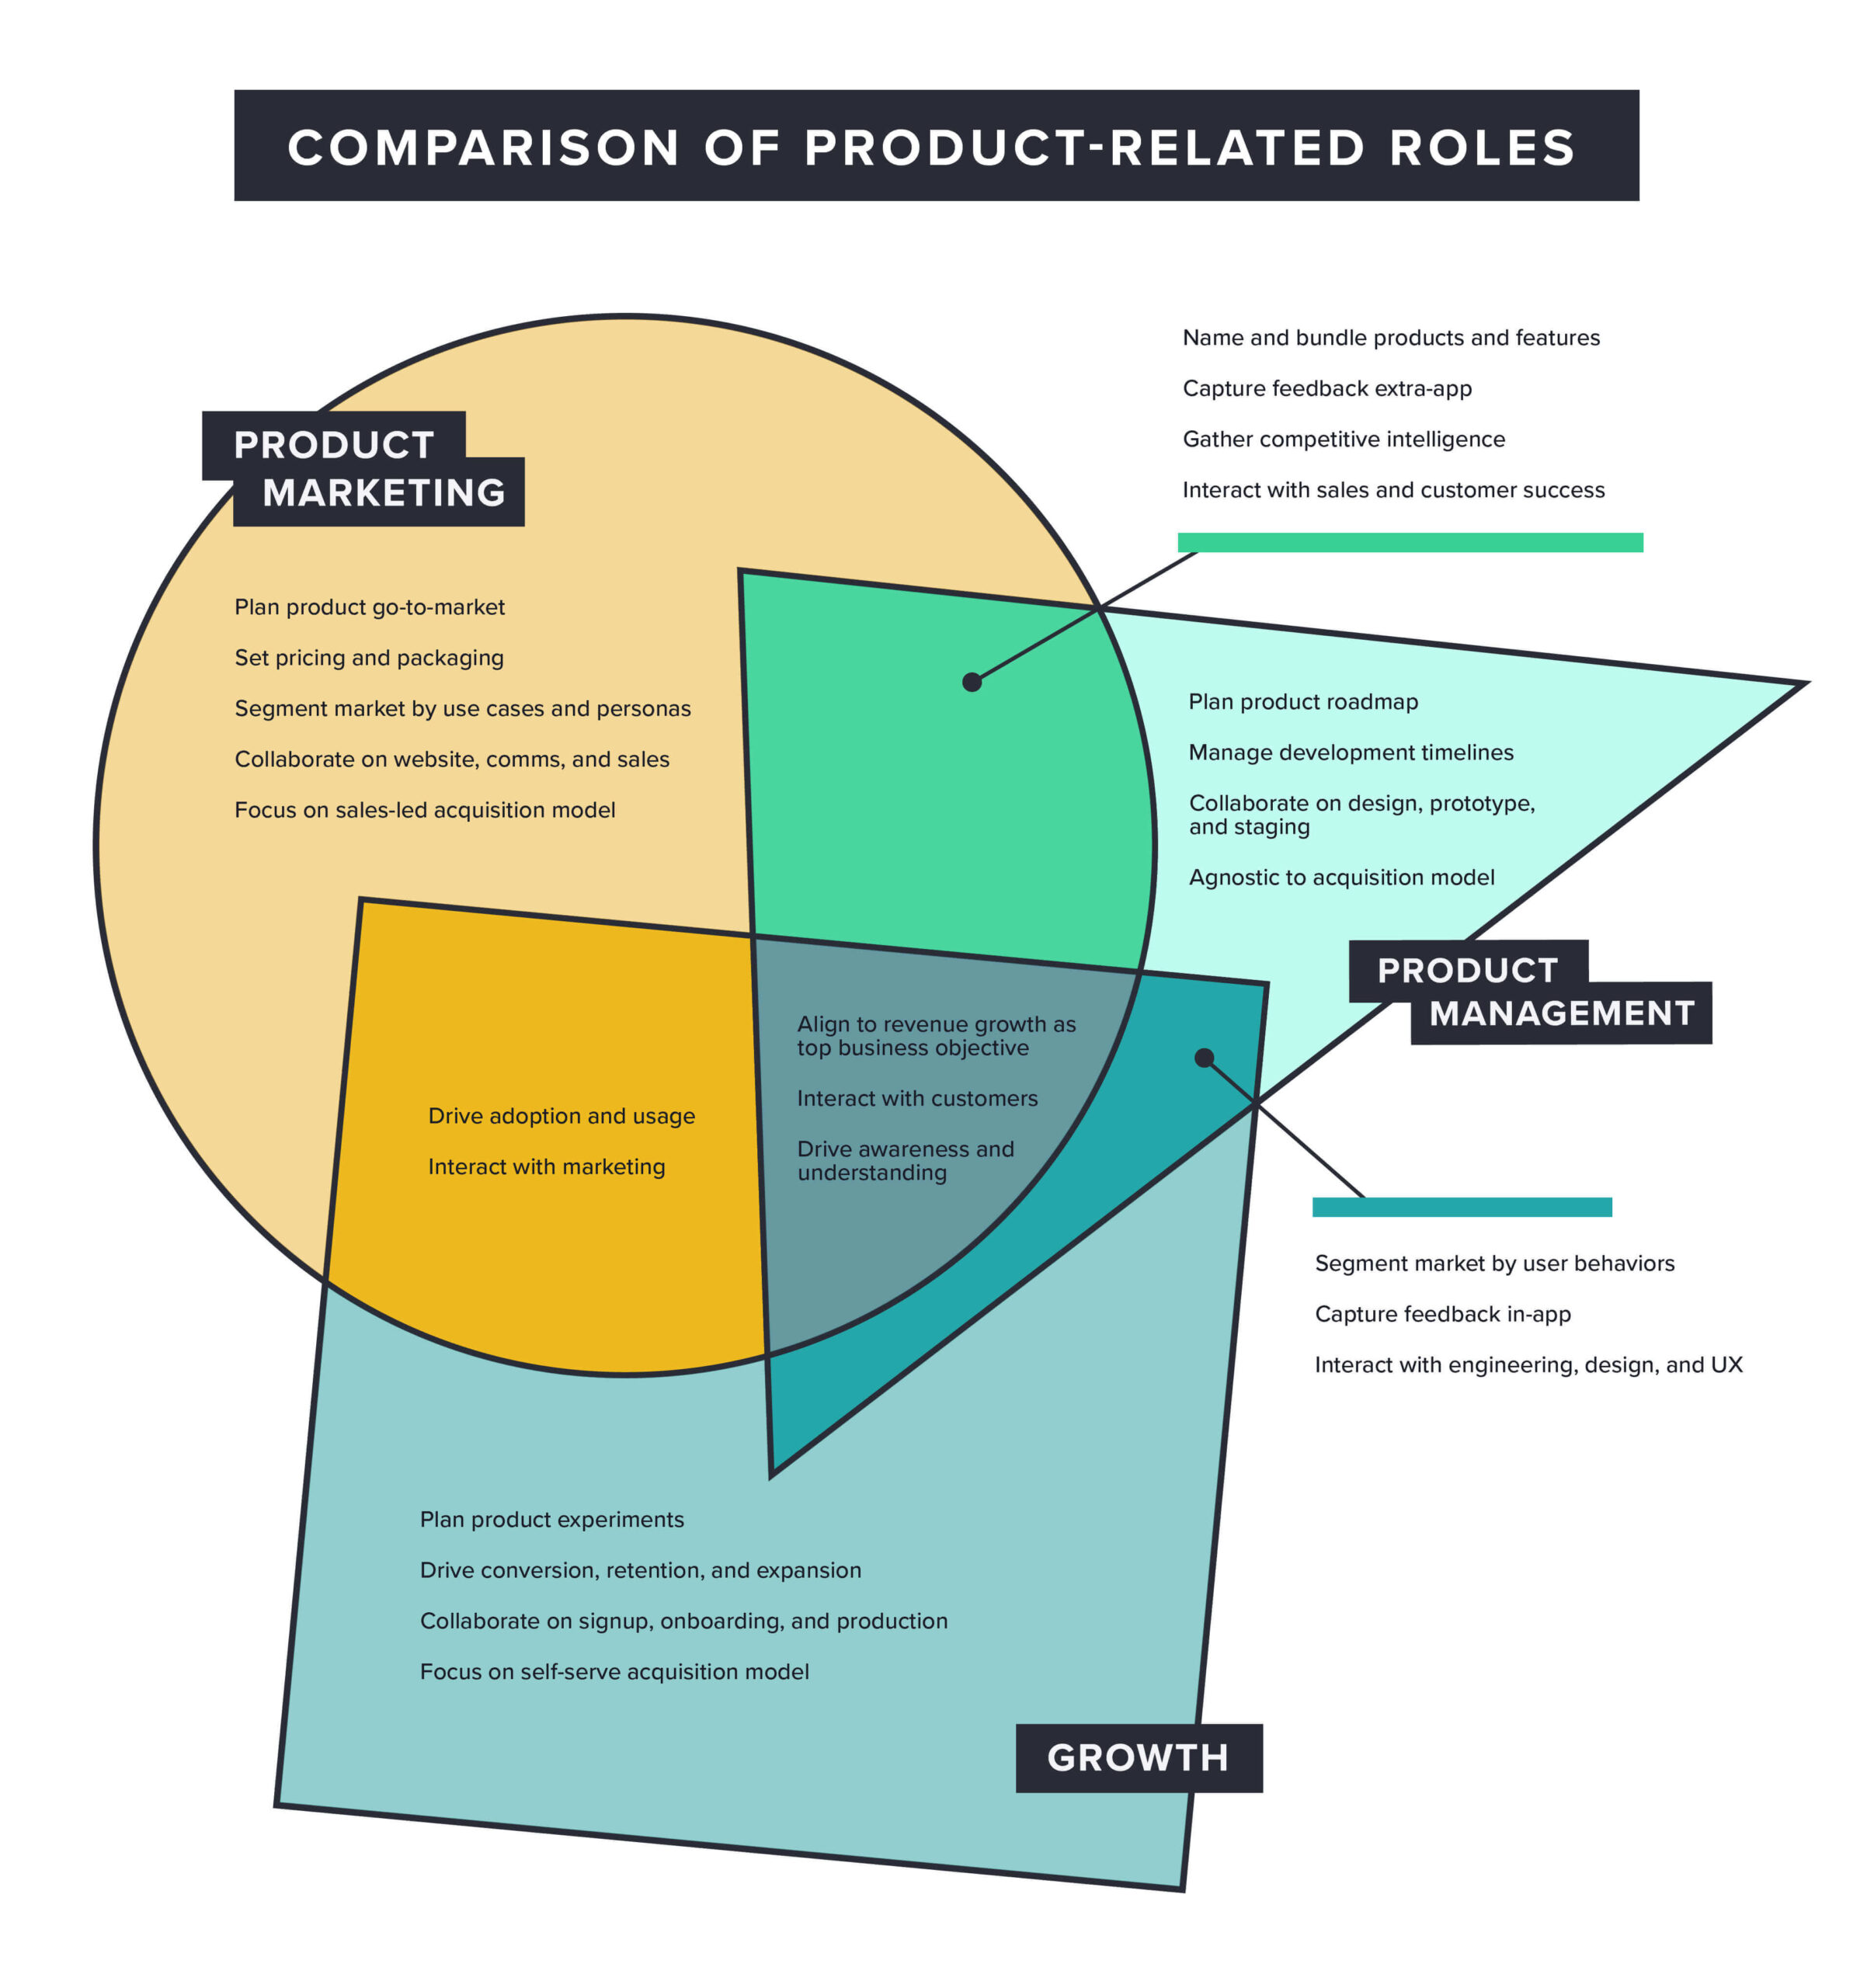 Comparison of Product-Related Roles